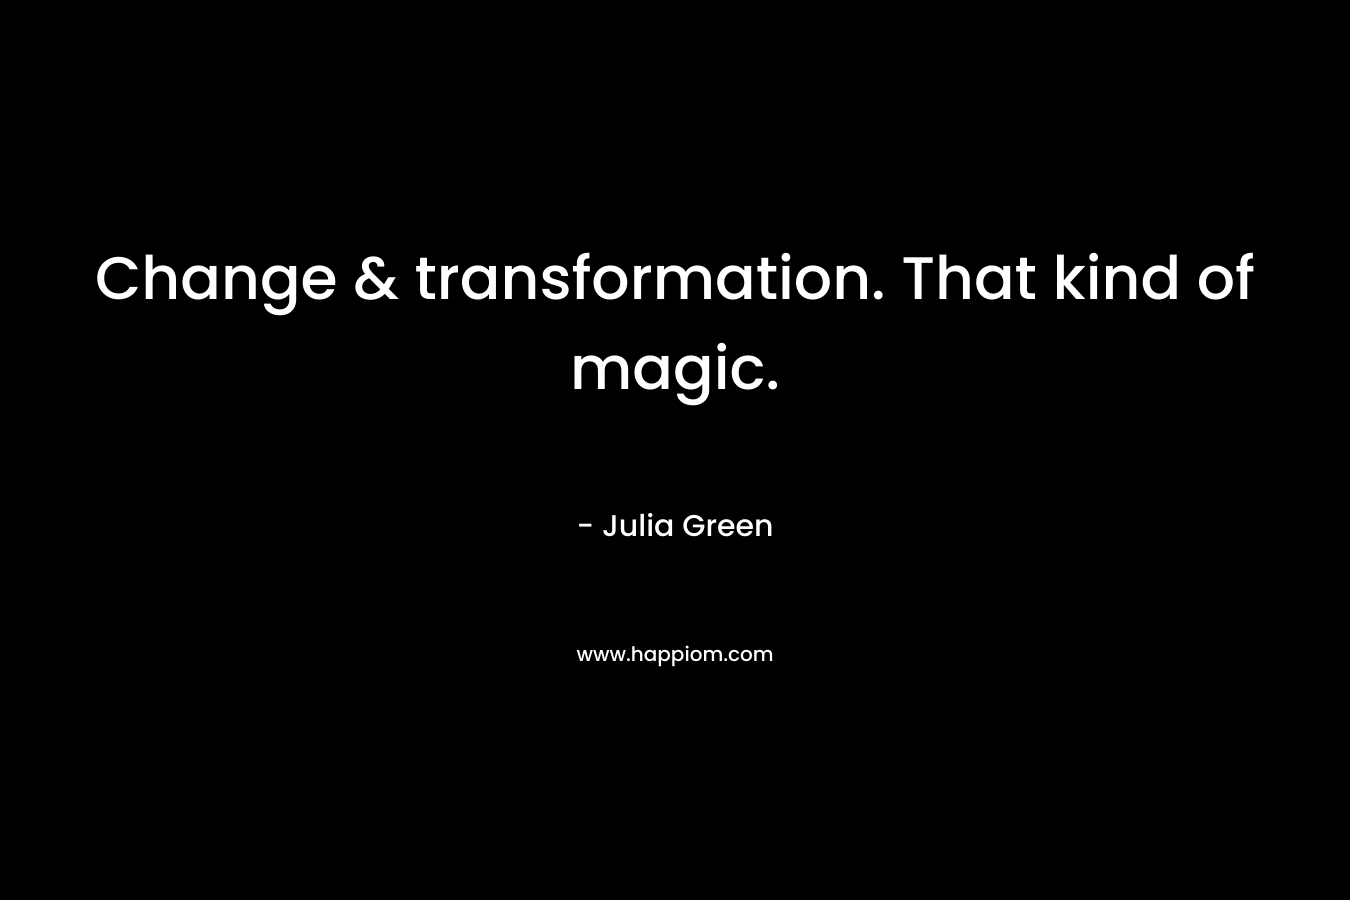 Change & transformation. That kind of magic.